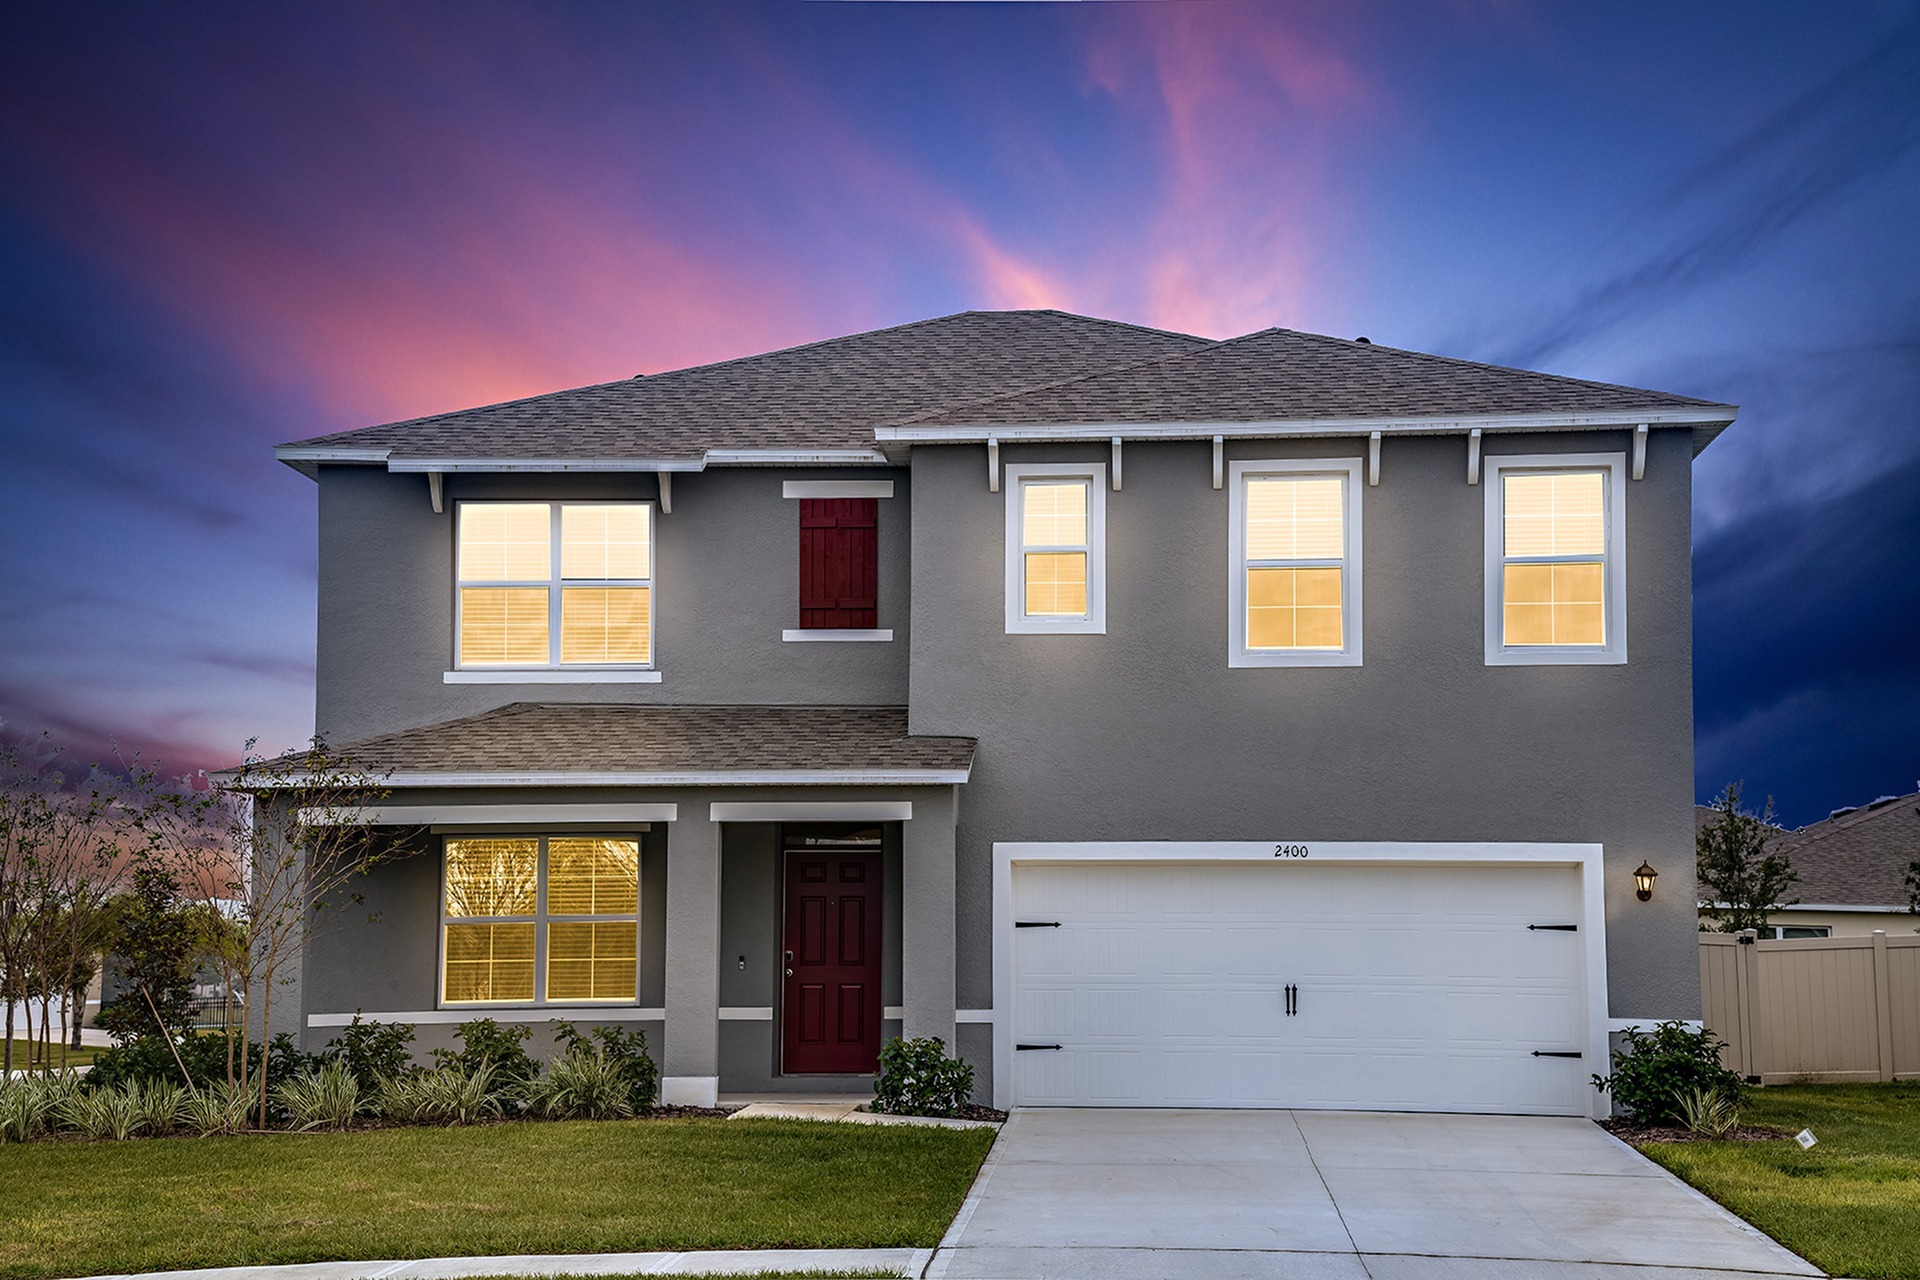 Photograph of the front side exterior of one of our homes in Apopka, FL, featuring a driveway, garage, and green lawn.